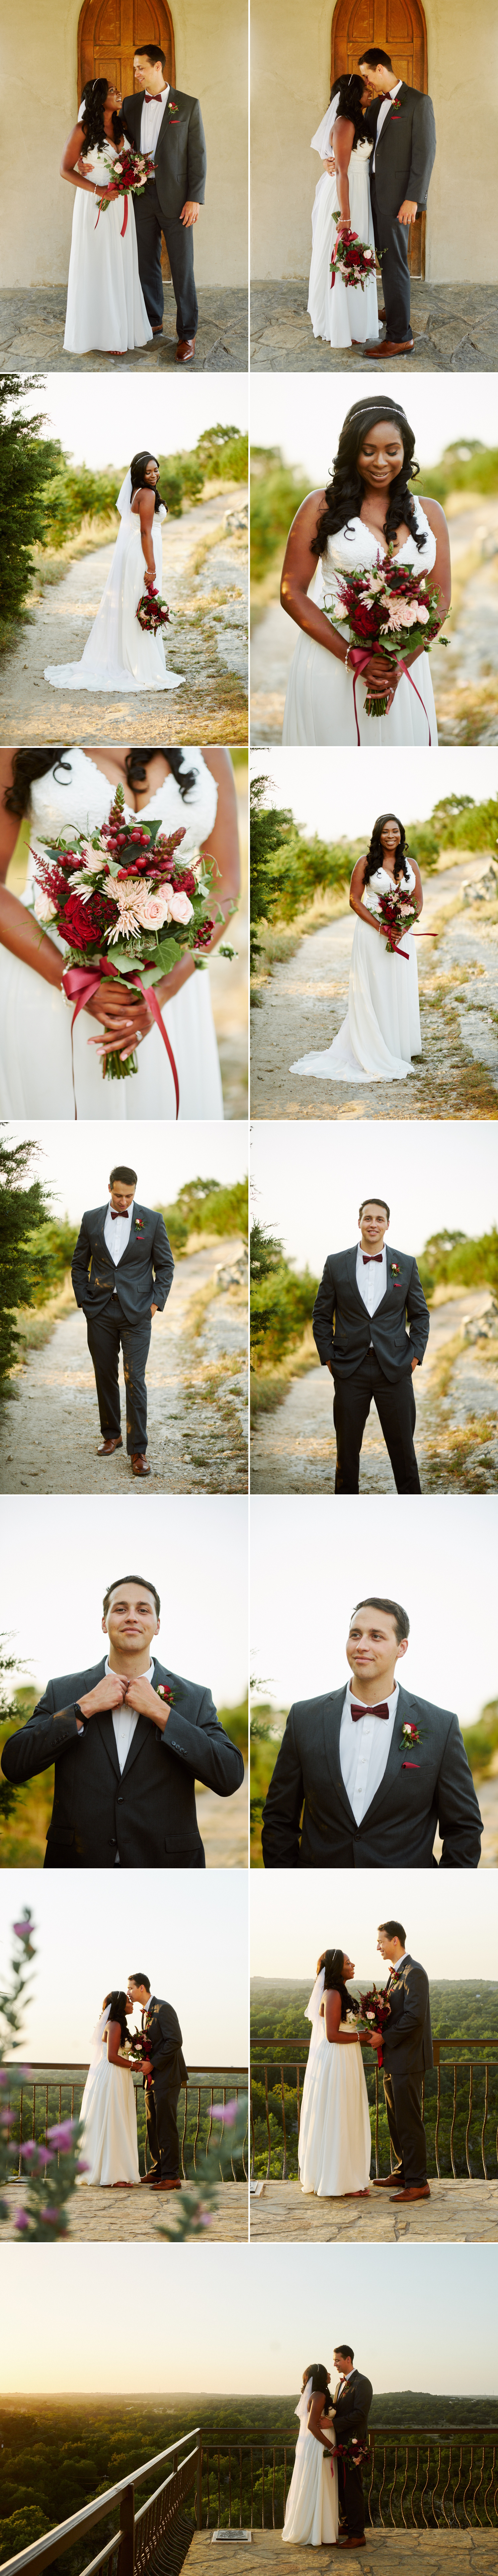 Portraits of the bride and groom after the ceremony of their wedding at Chapel Dulcinea